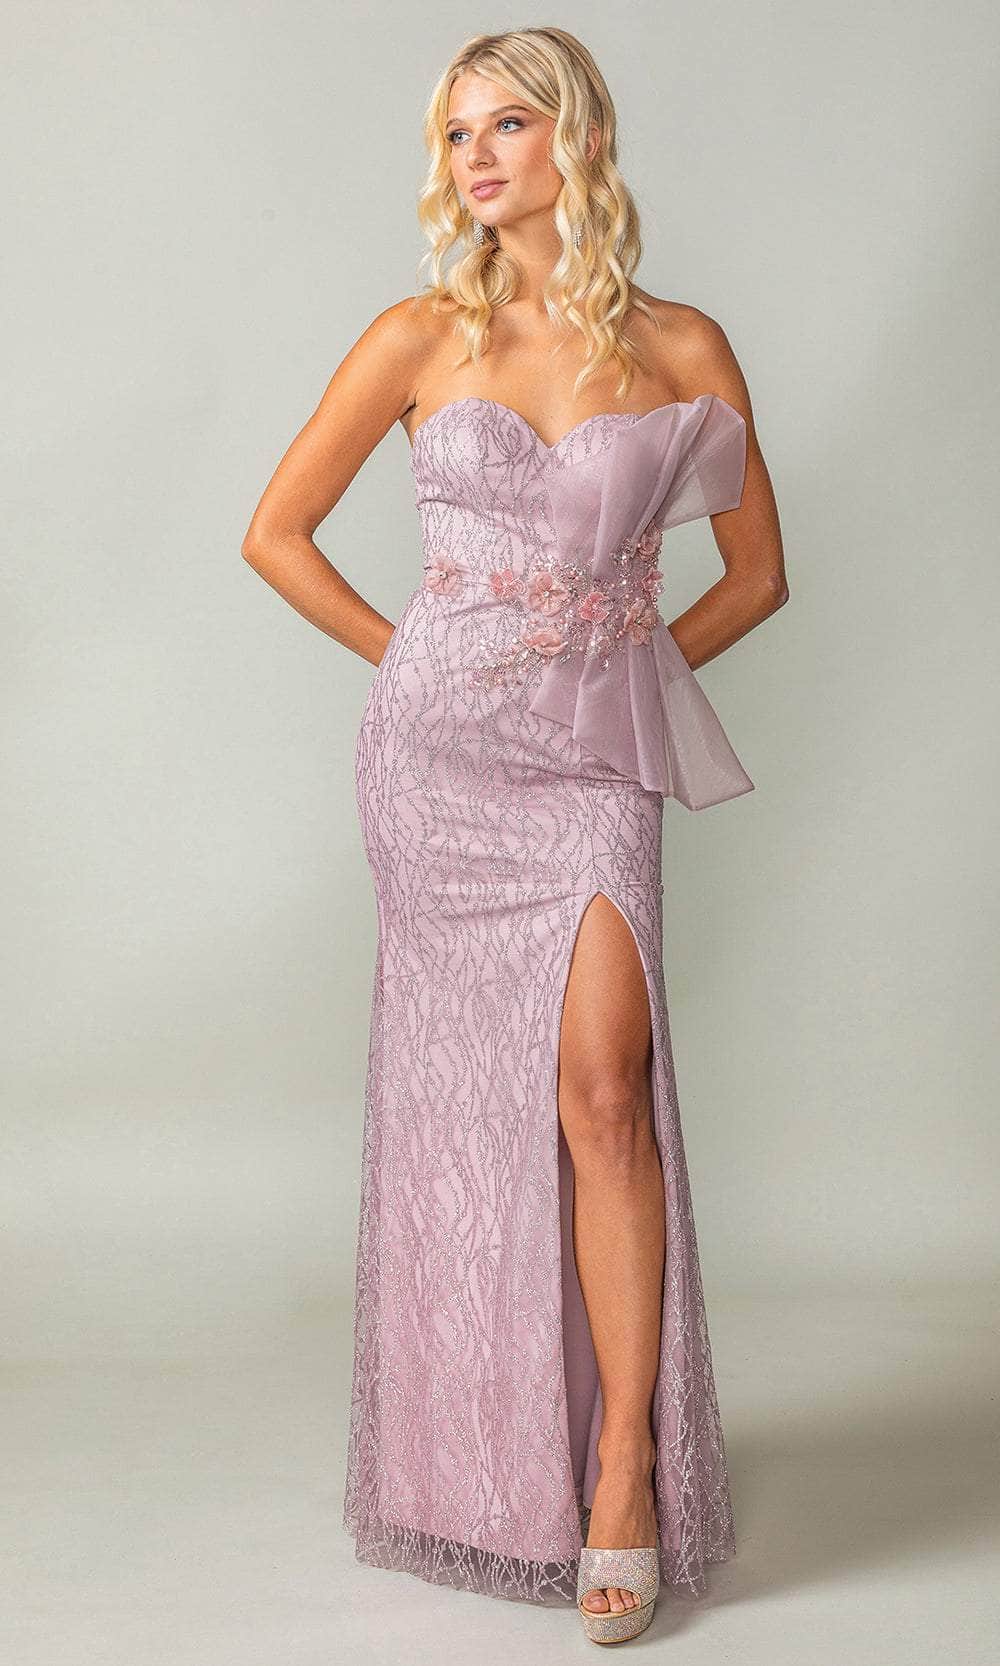 Dancing Queen 4394 - Strapless Ruffled Detail Prom Gown
